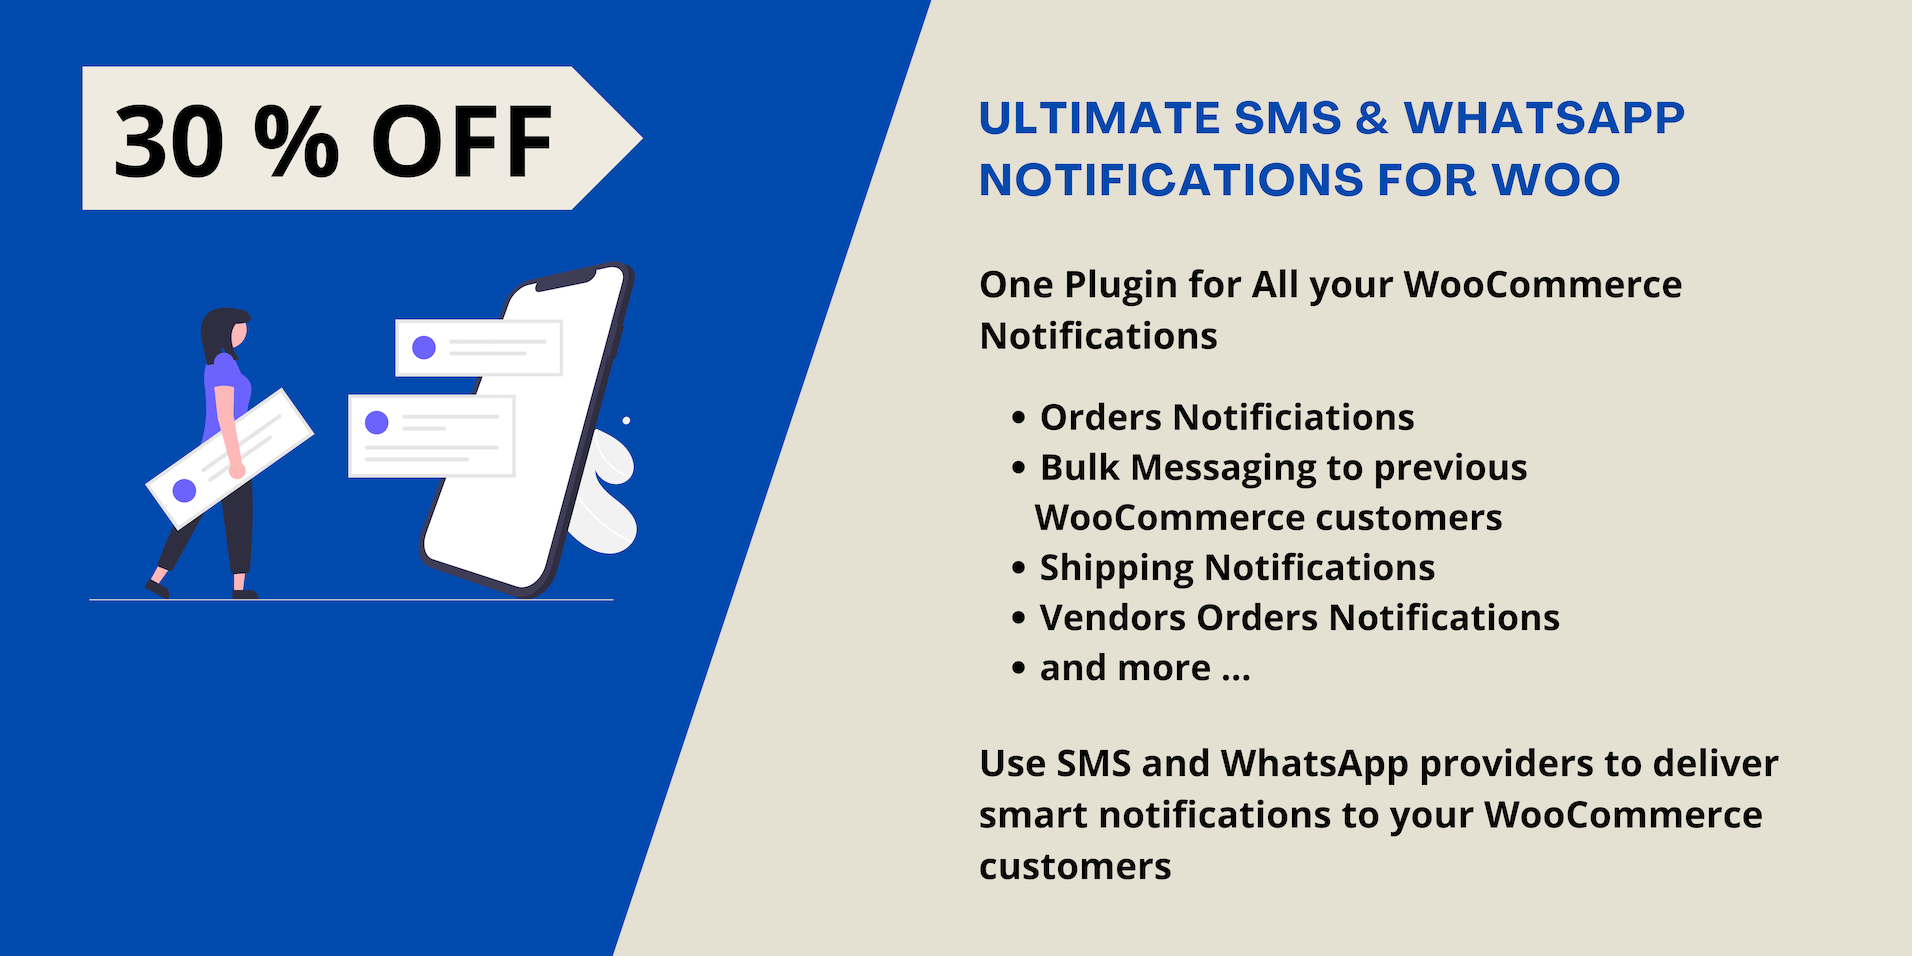 Ultimate SMS & WhatsApp Notifications for Woo